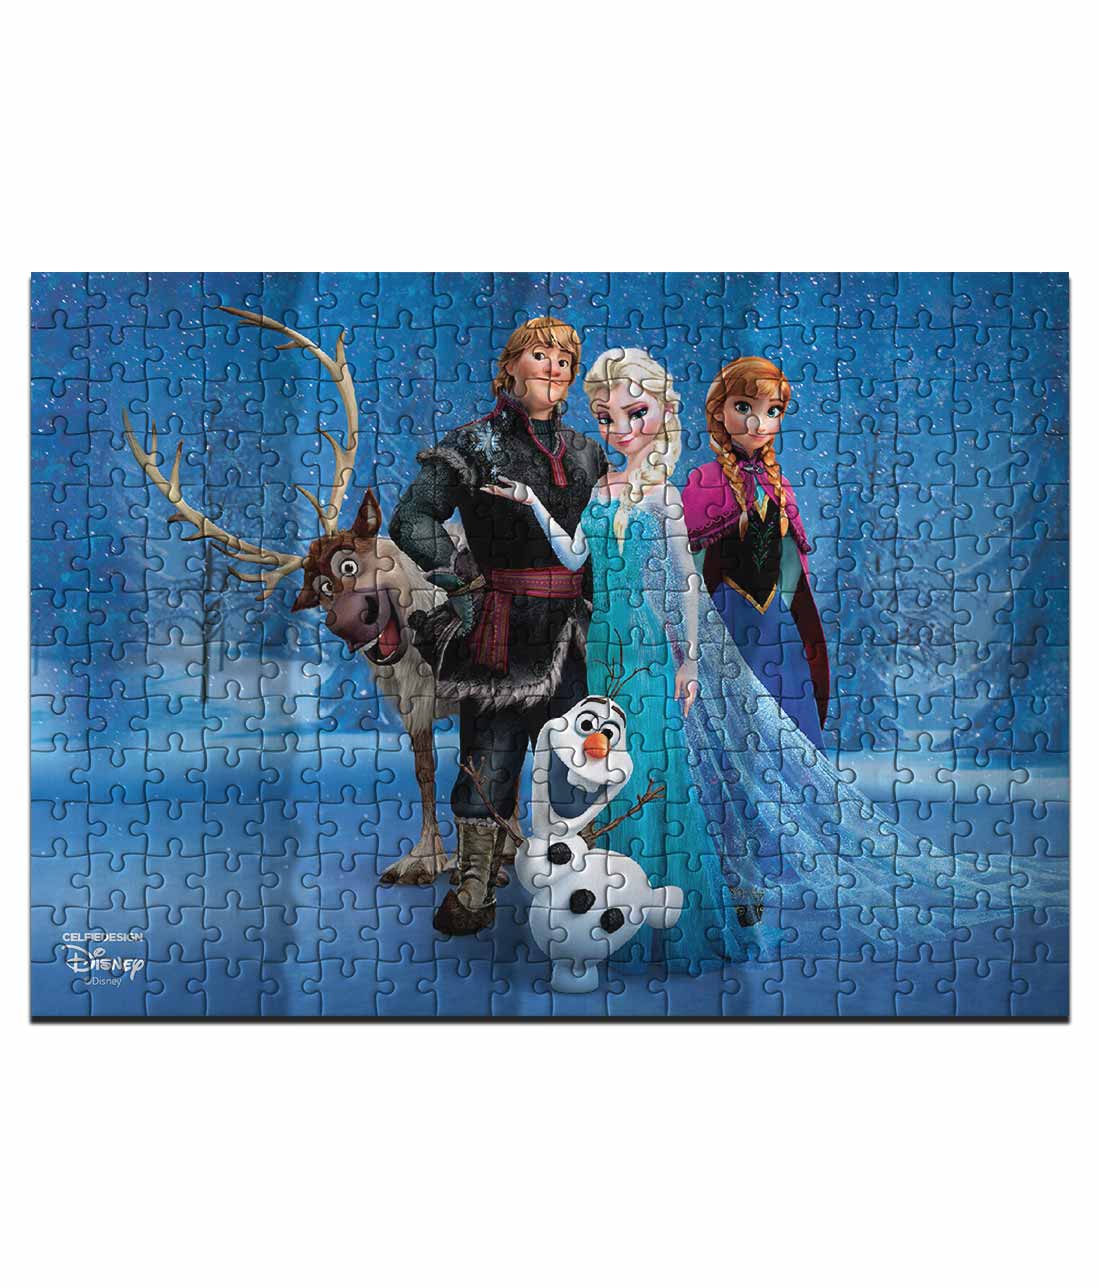 Buy Frozen together - Magnetic Puzzles Puzzles Online